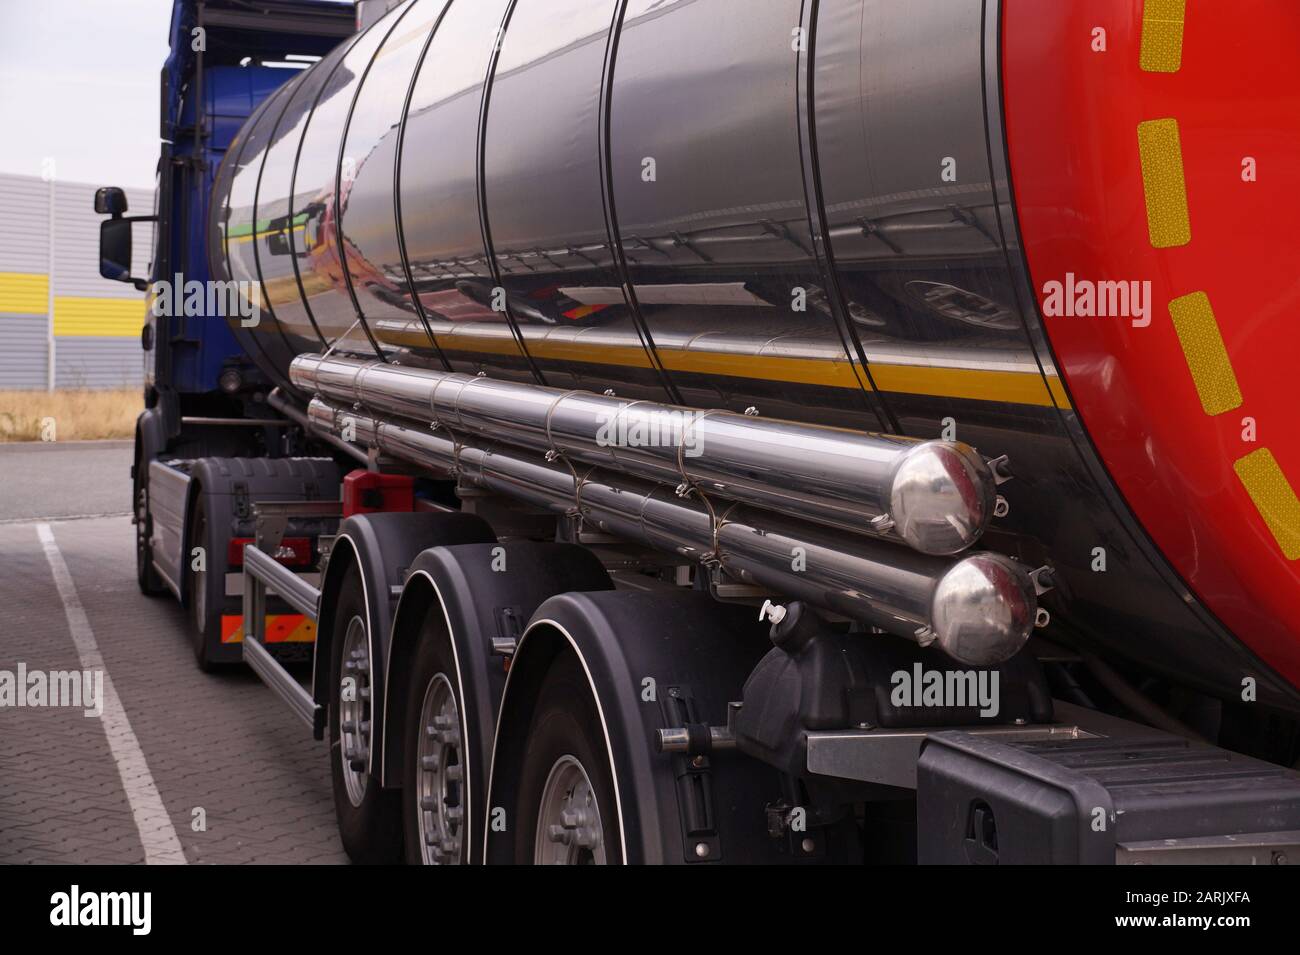 Tanker truck while parking in a parking lot. Parking by the highway. Stock Photo